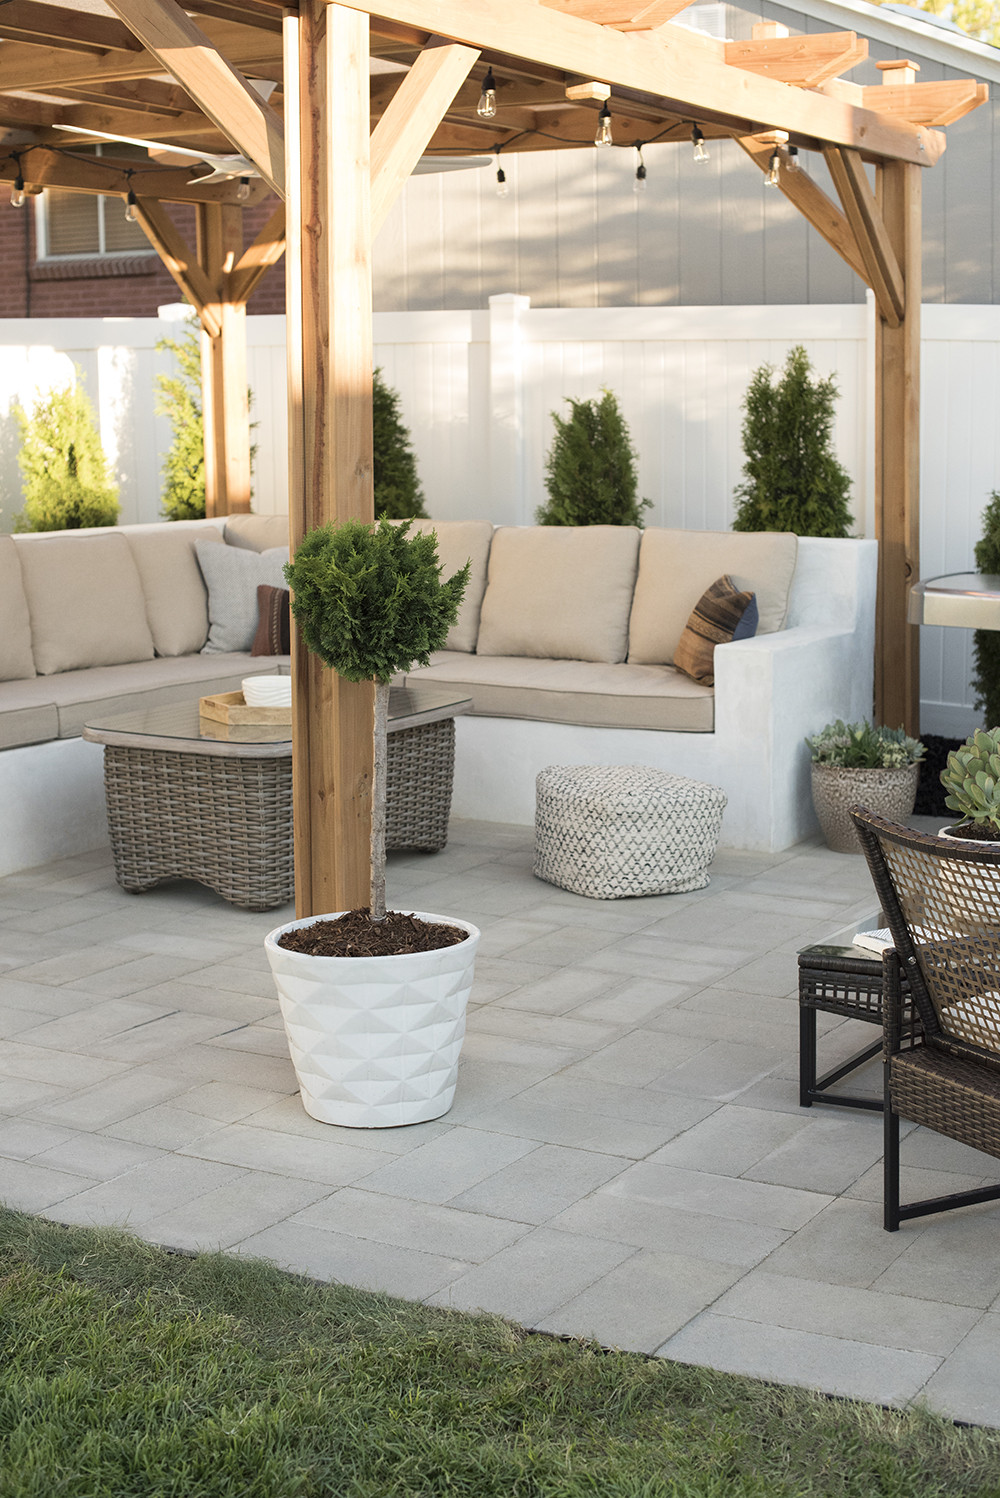 Backyard Ideas With Pavers
 How to Install A Custom Paver Patio Room for Tuesday Blog